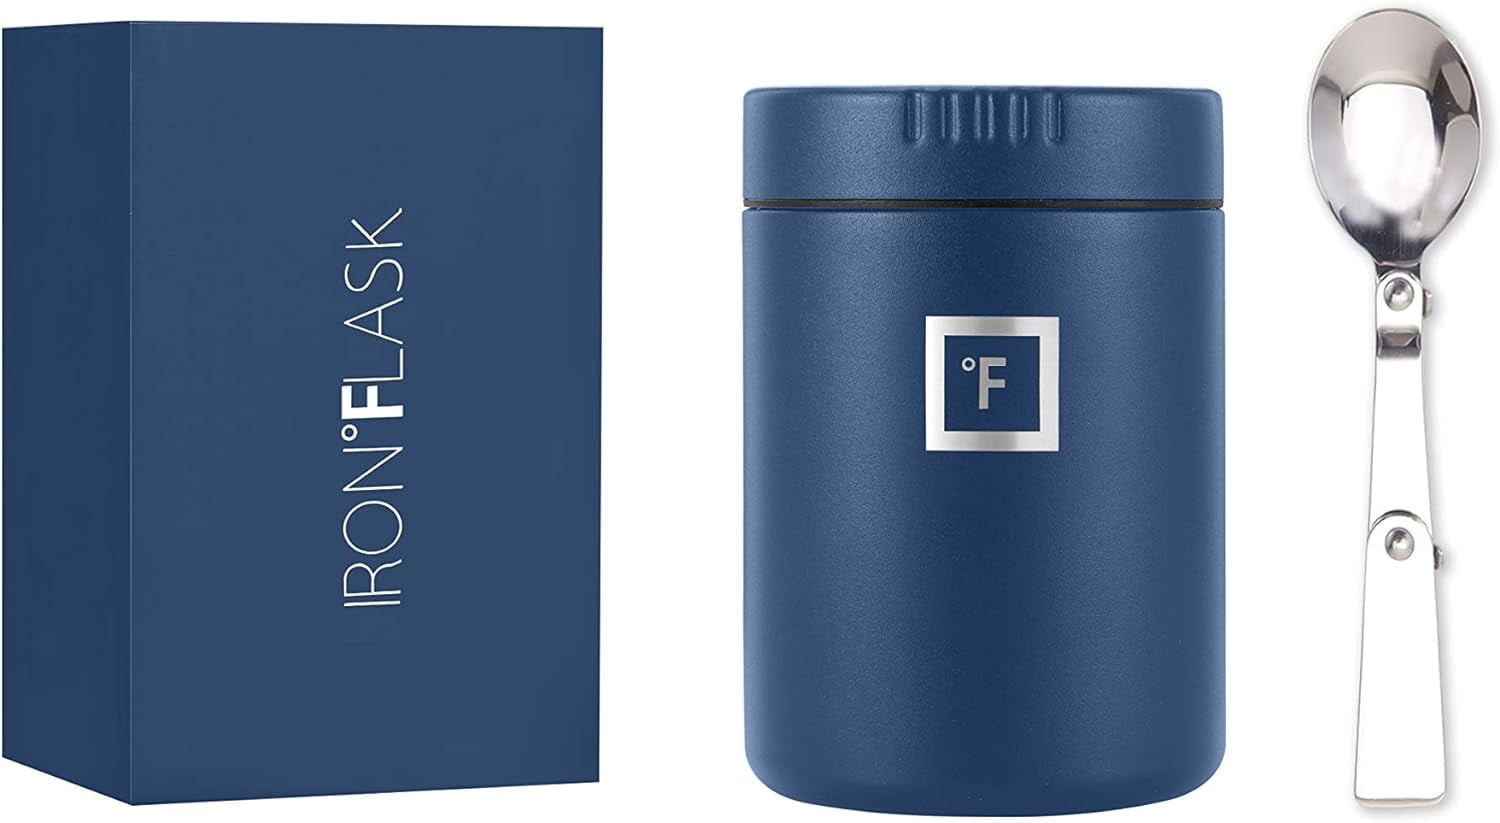 <p><a href="https://www.amazon.com/IRON-%C2%B0FLASK-Food-Jar-Thermoses/dp/B082PZYXZ6">BUY NOW</a></p><p>$10</p><p><a href="https://www.amazon.com/IRON-%C2%B0FLASK-Food-Jar-Thermoses/dp/B082PZYXZ6" class="ga-track"><strong>IRON °FLASK Thermos for Hot Food</strong></a> ($10, originally $21)</p> <p>Keep soups and drinks warm for hours on end in an insulated thermos. This one even comes with a foldable spoon.</p>